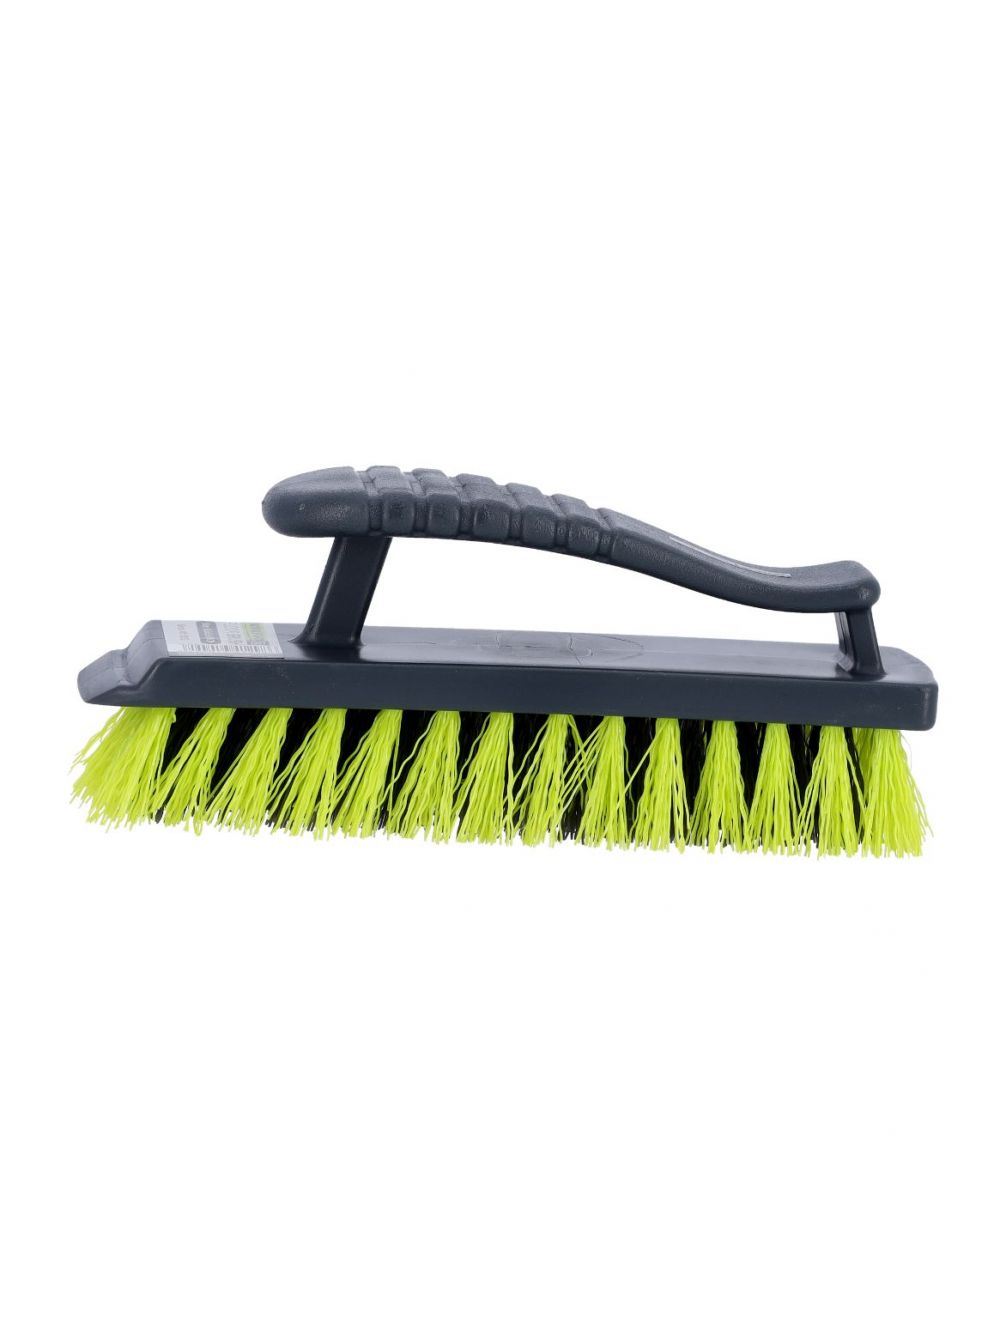 Royalford RF2356GR Floor/Dish Brush - Easy to Clean Hard & Stiff Bristle Brush Made of Durable PP & TRP Material - Floor Tile Decking Household Scrub Cleaning | Ideal for Tiles, Wood Floor, Sink & More